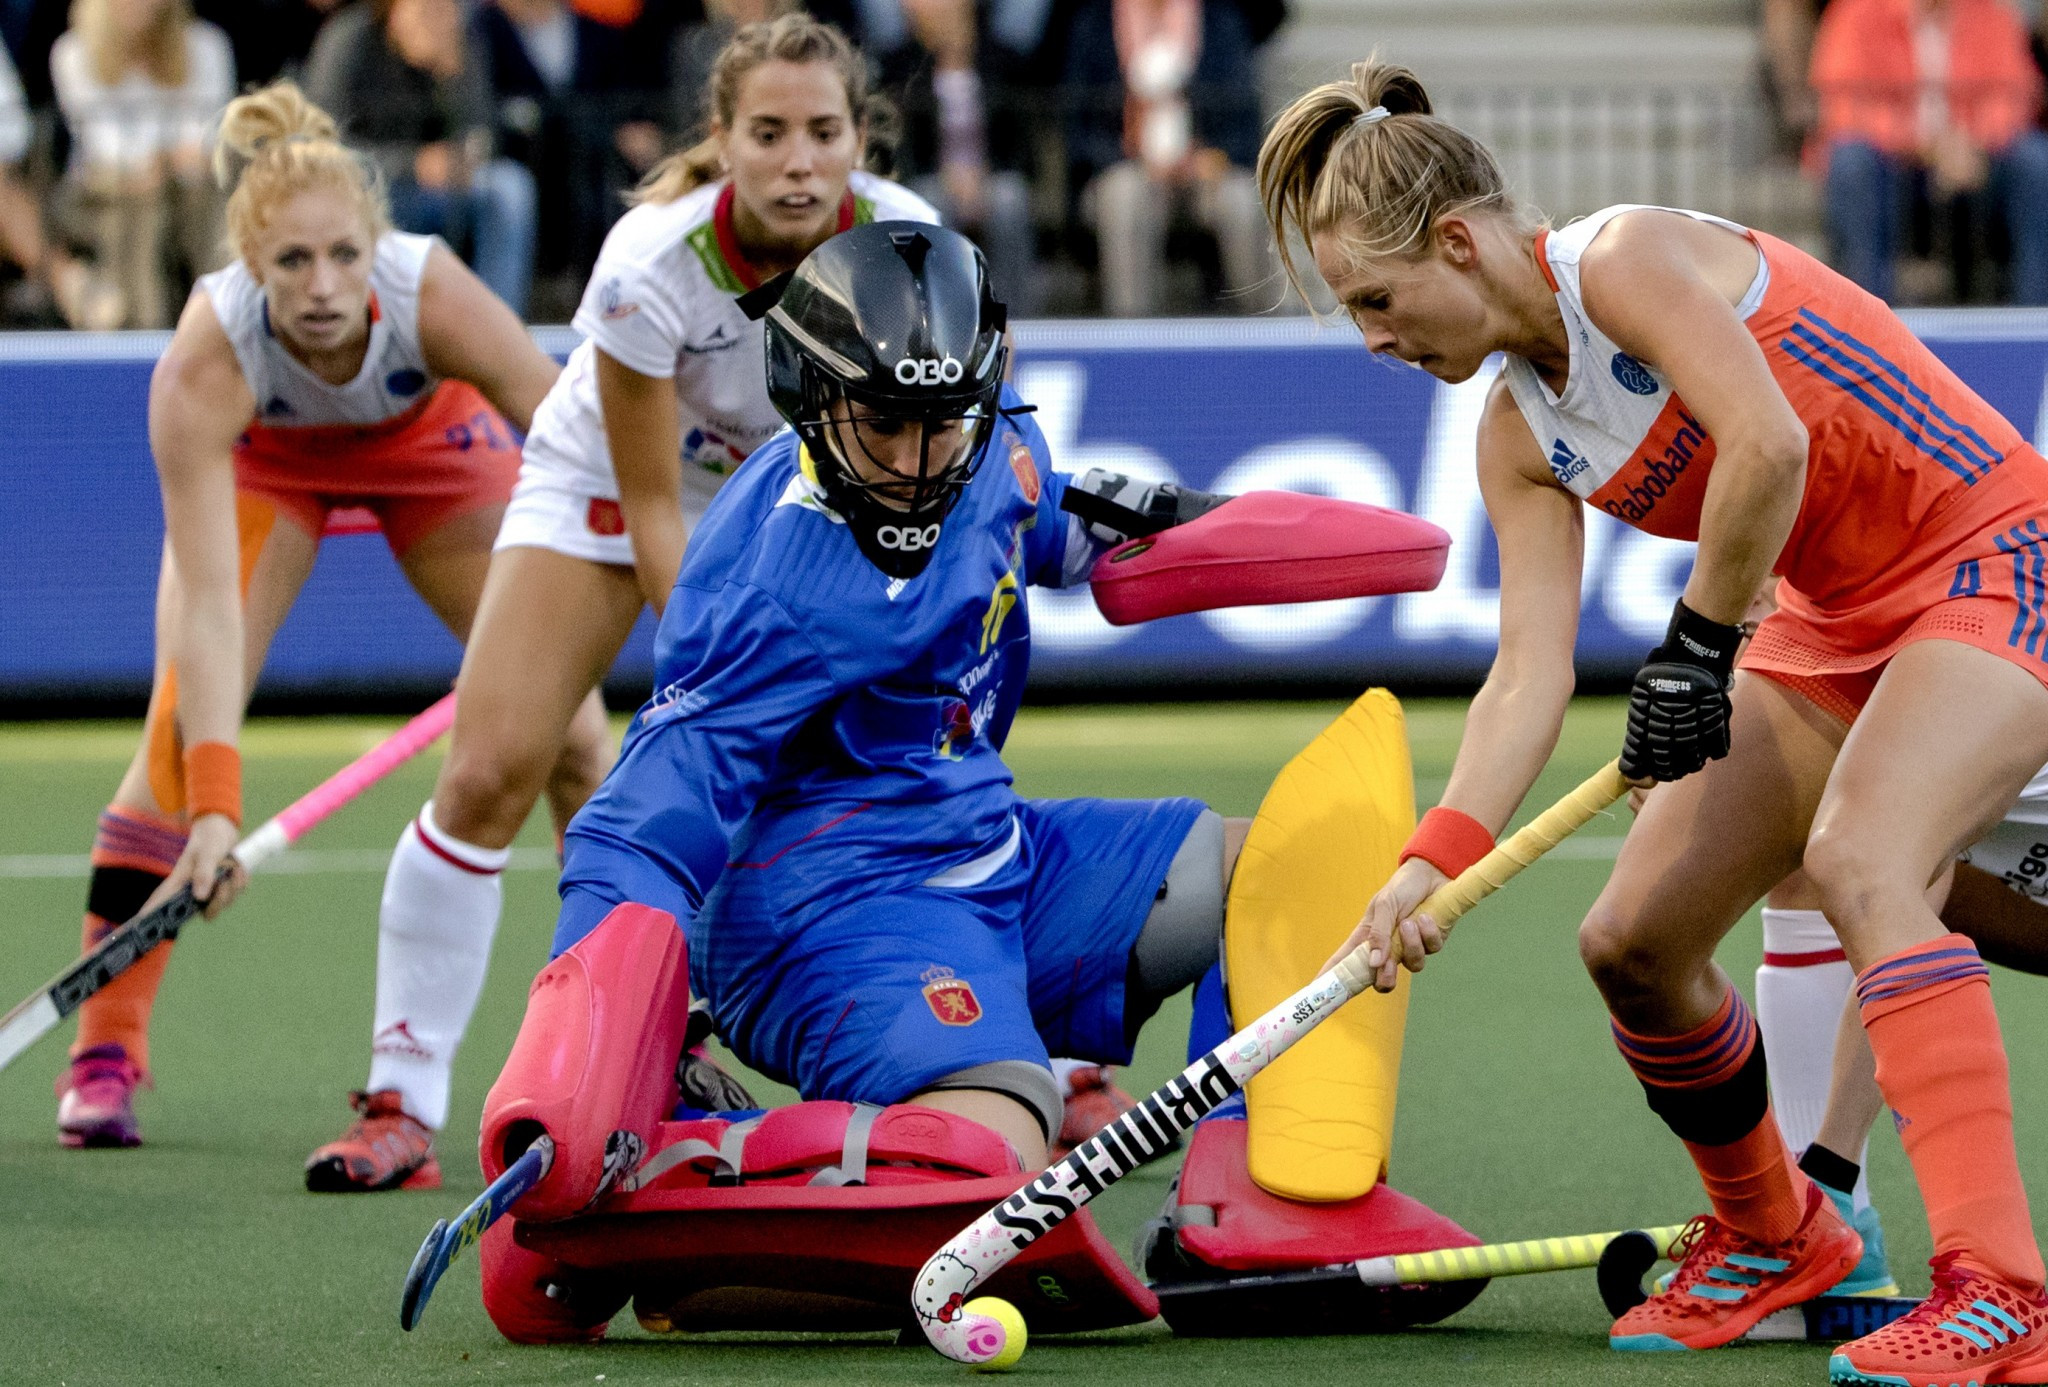 Hosts claim victory on weather interrupted opening day of EuroHockey Championships